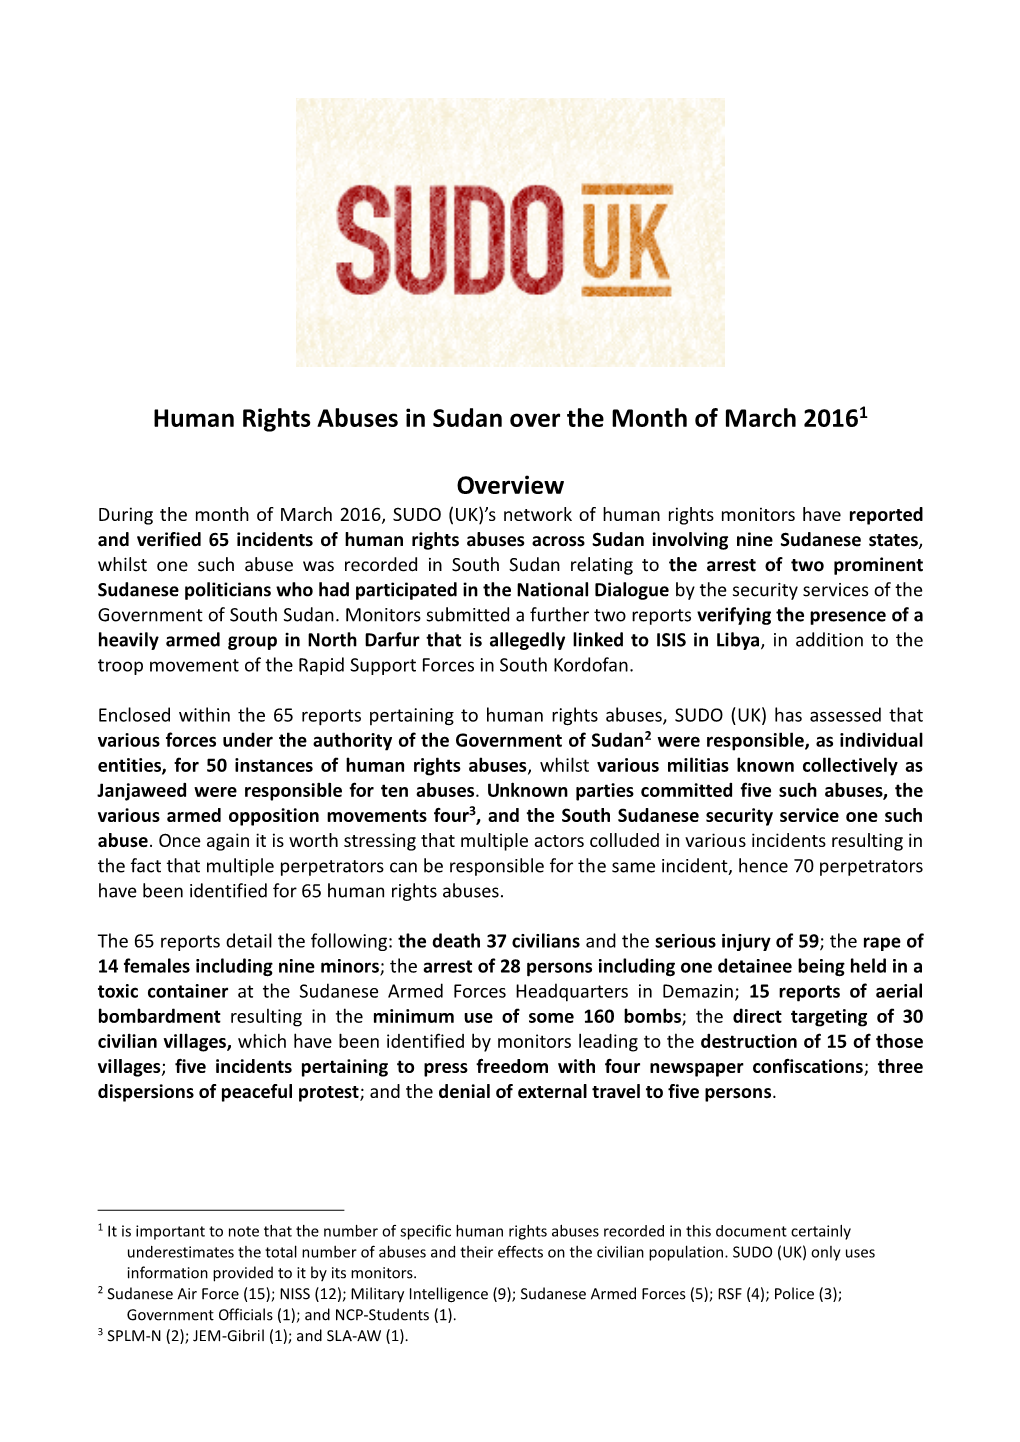 Human Rights Abuses in Sudan Over the Month of March 20161 Overview